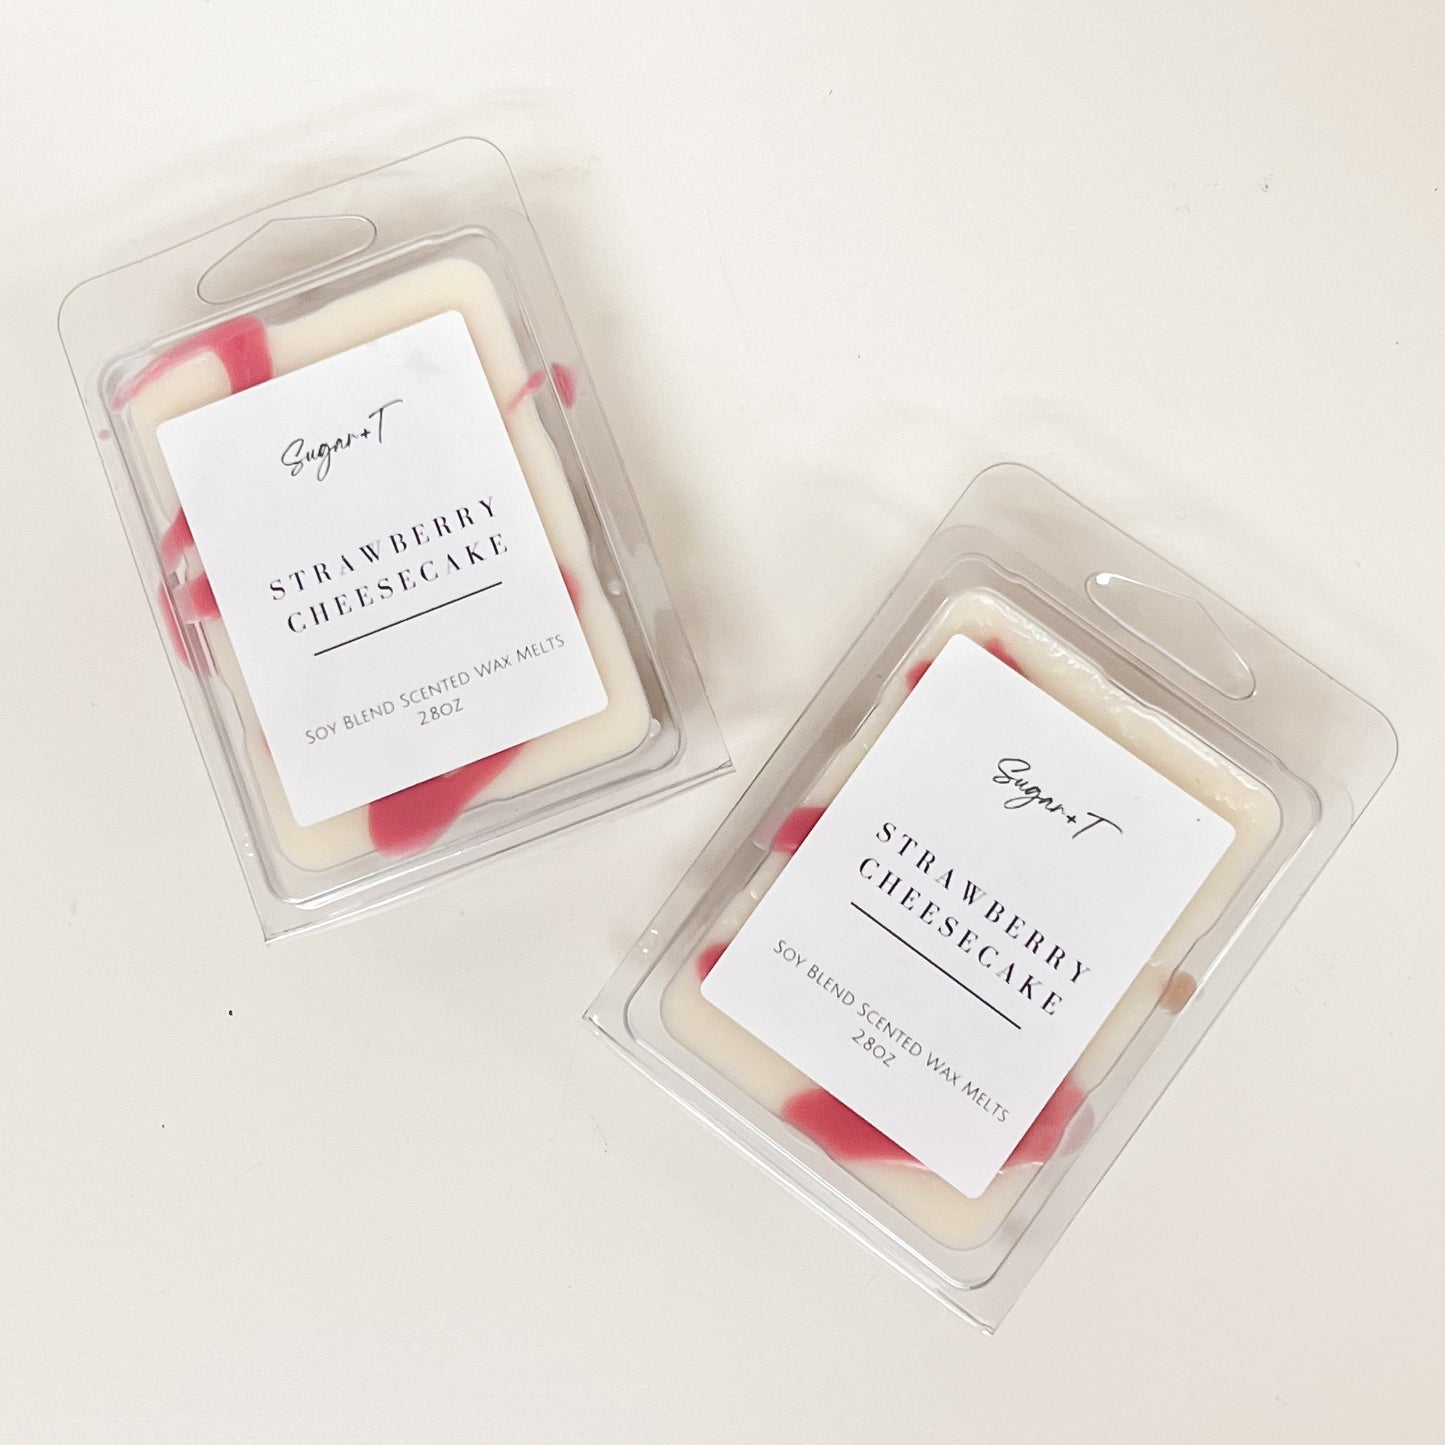 Strawberry Cheesecake Scented Wax Melts